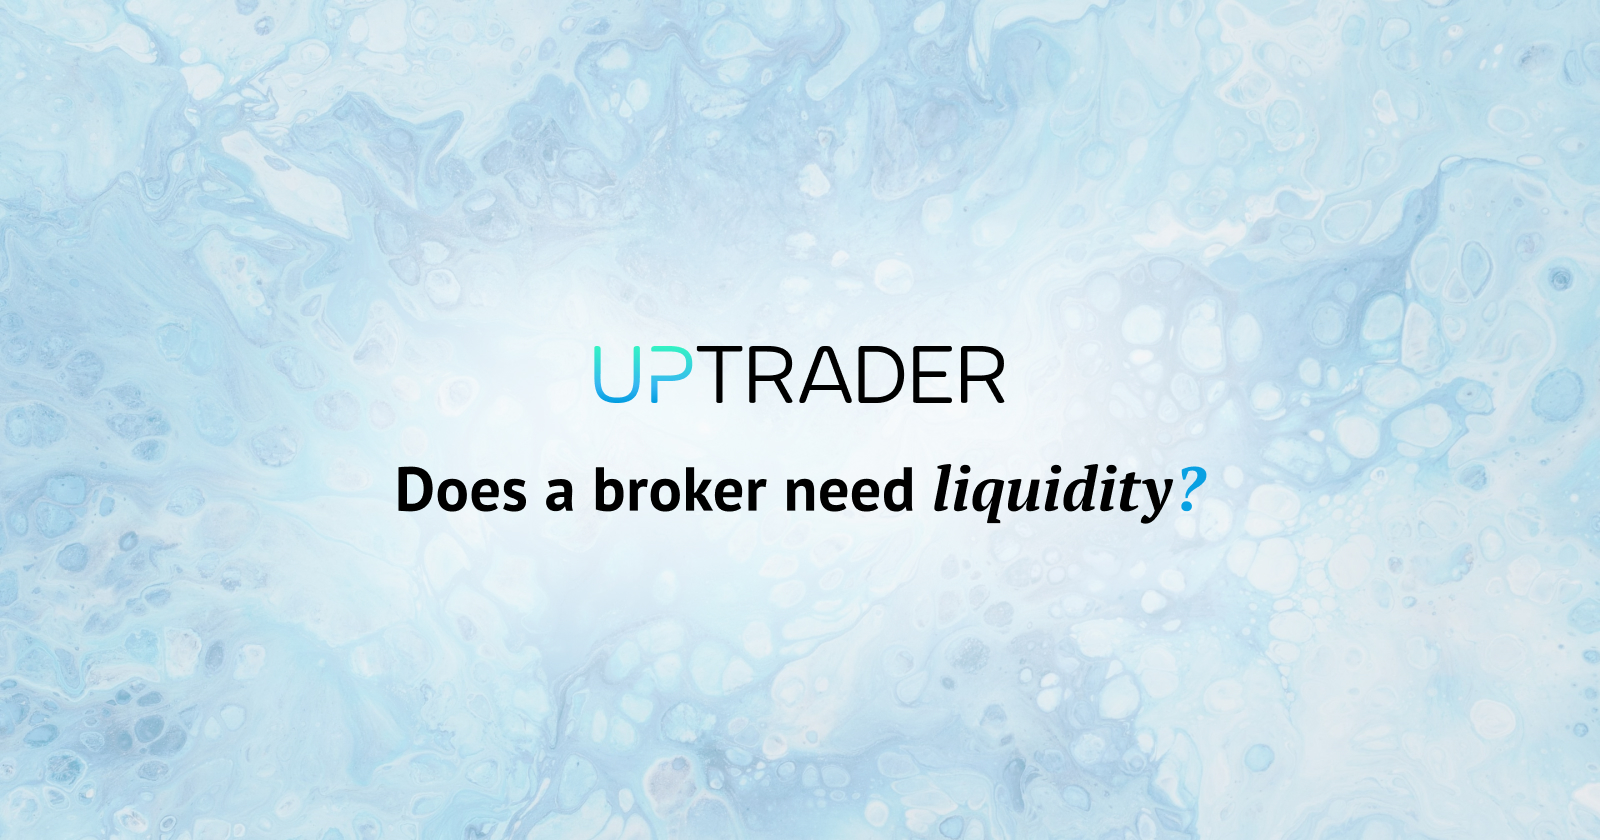 Does a broker need liquidity?